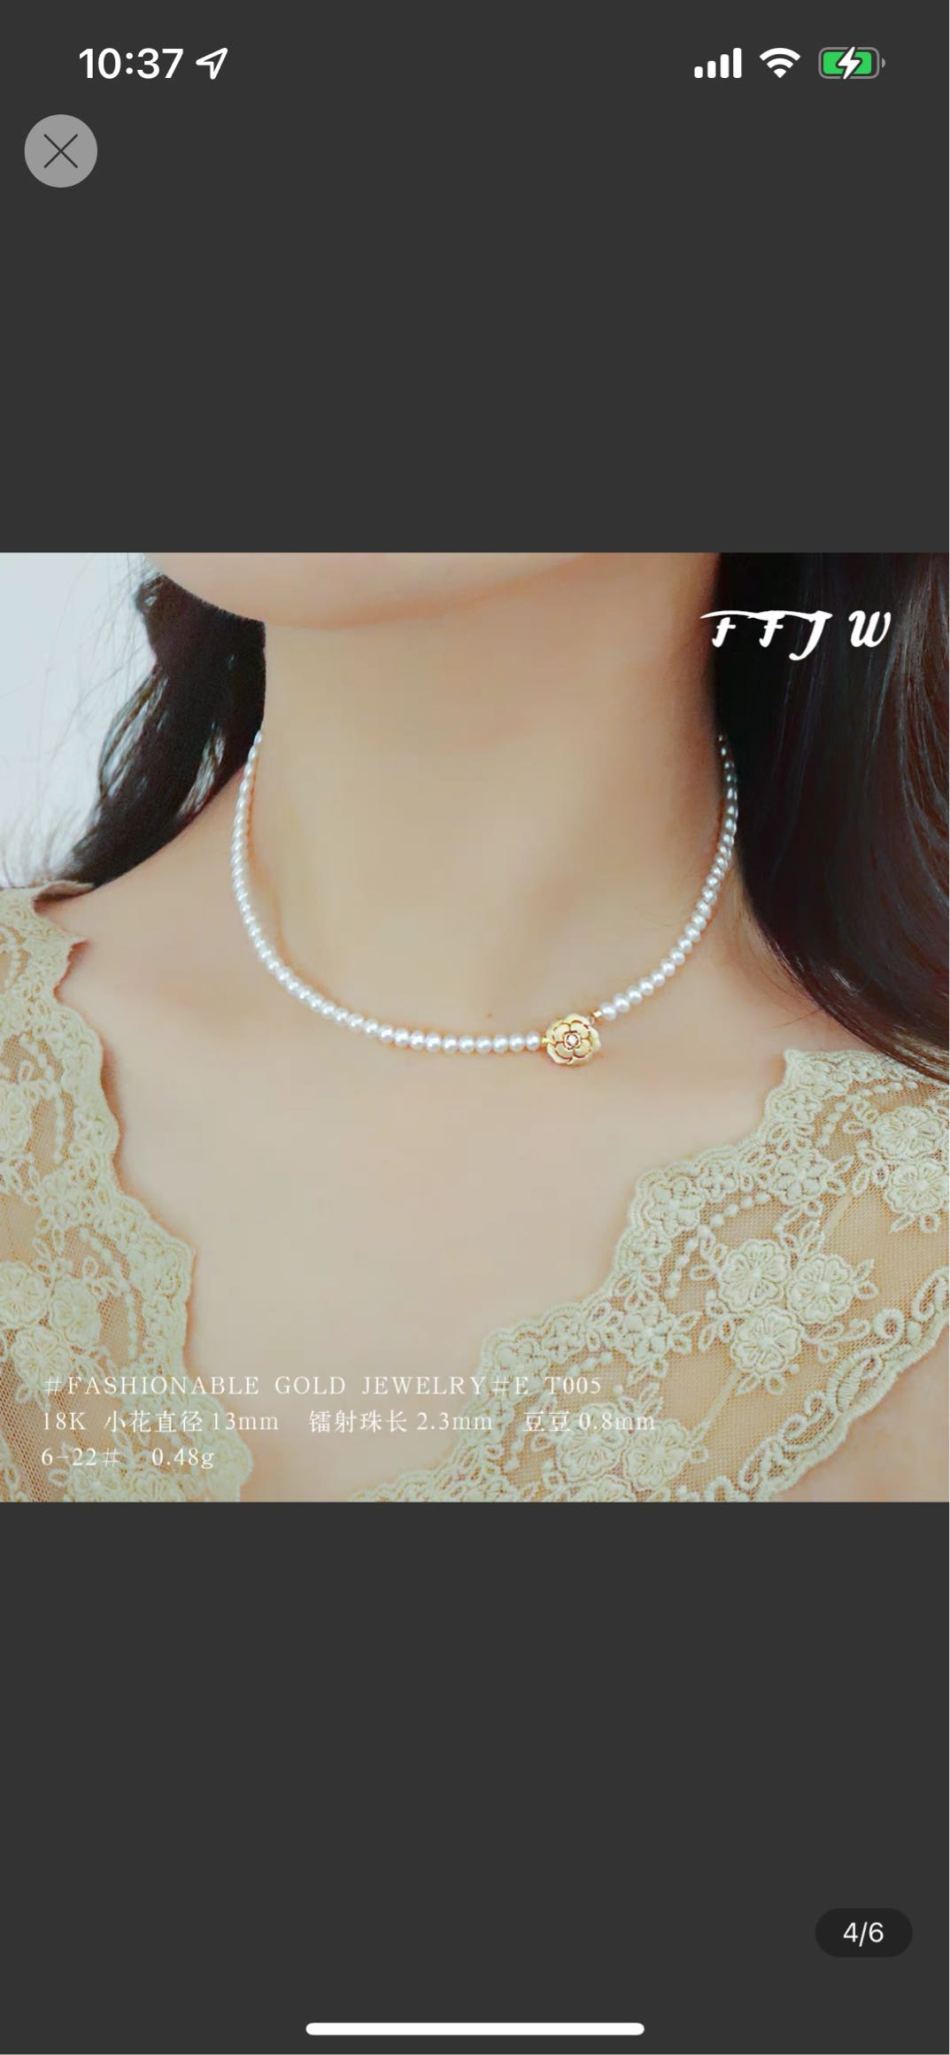 https://img1.superbuy.com/images/consult/2022/07/25/c65a7288382d5ed2bff145d5fcd3a32b.jpg?x-oss-process=image/resize,w_950